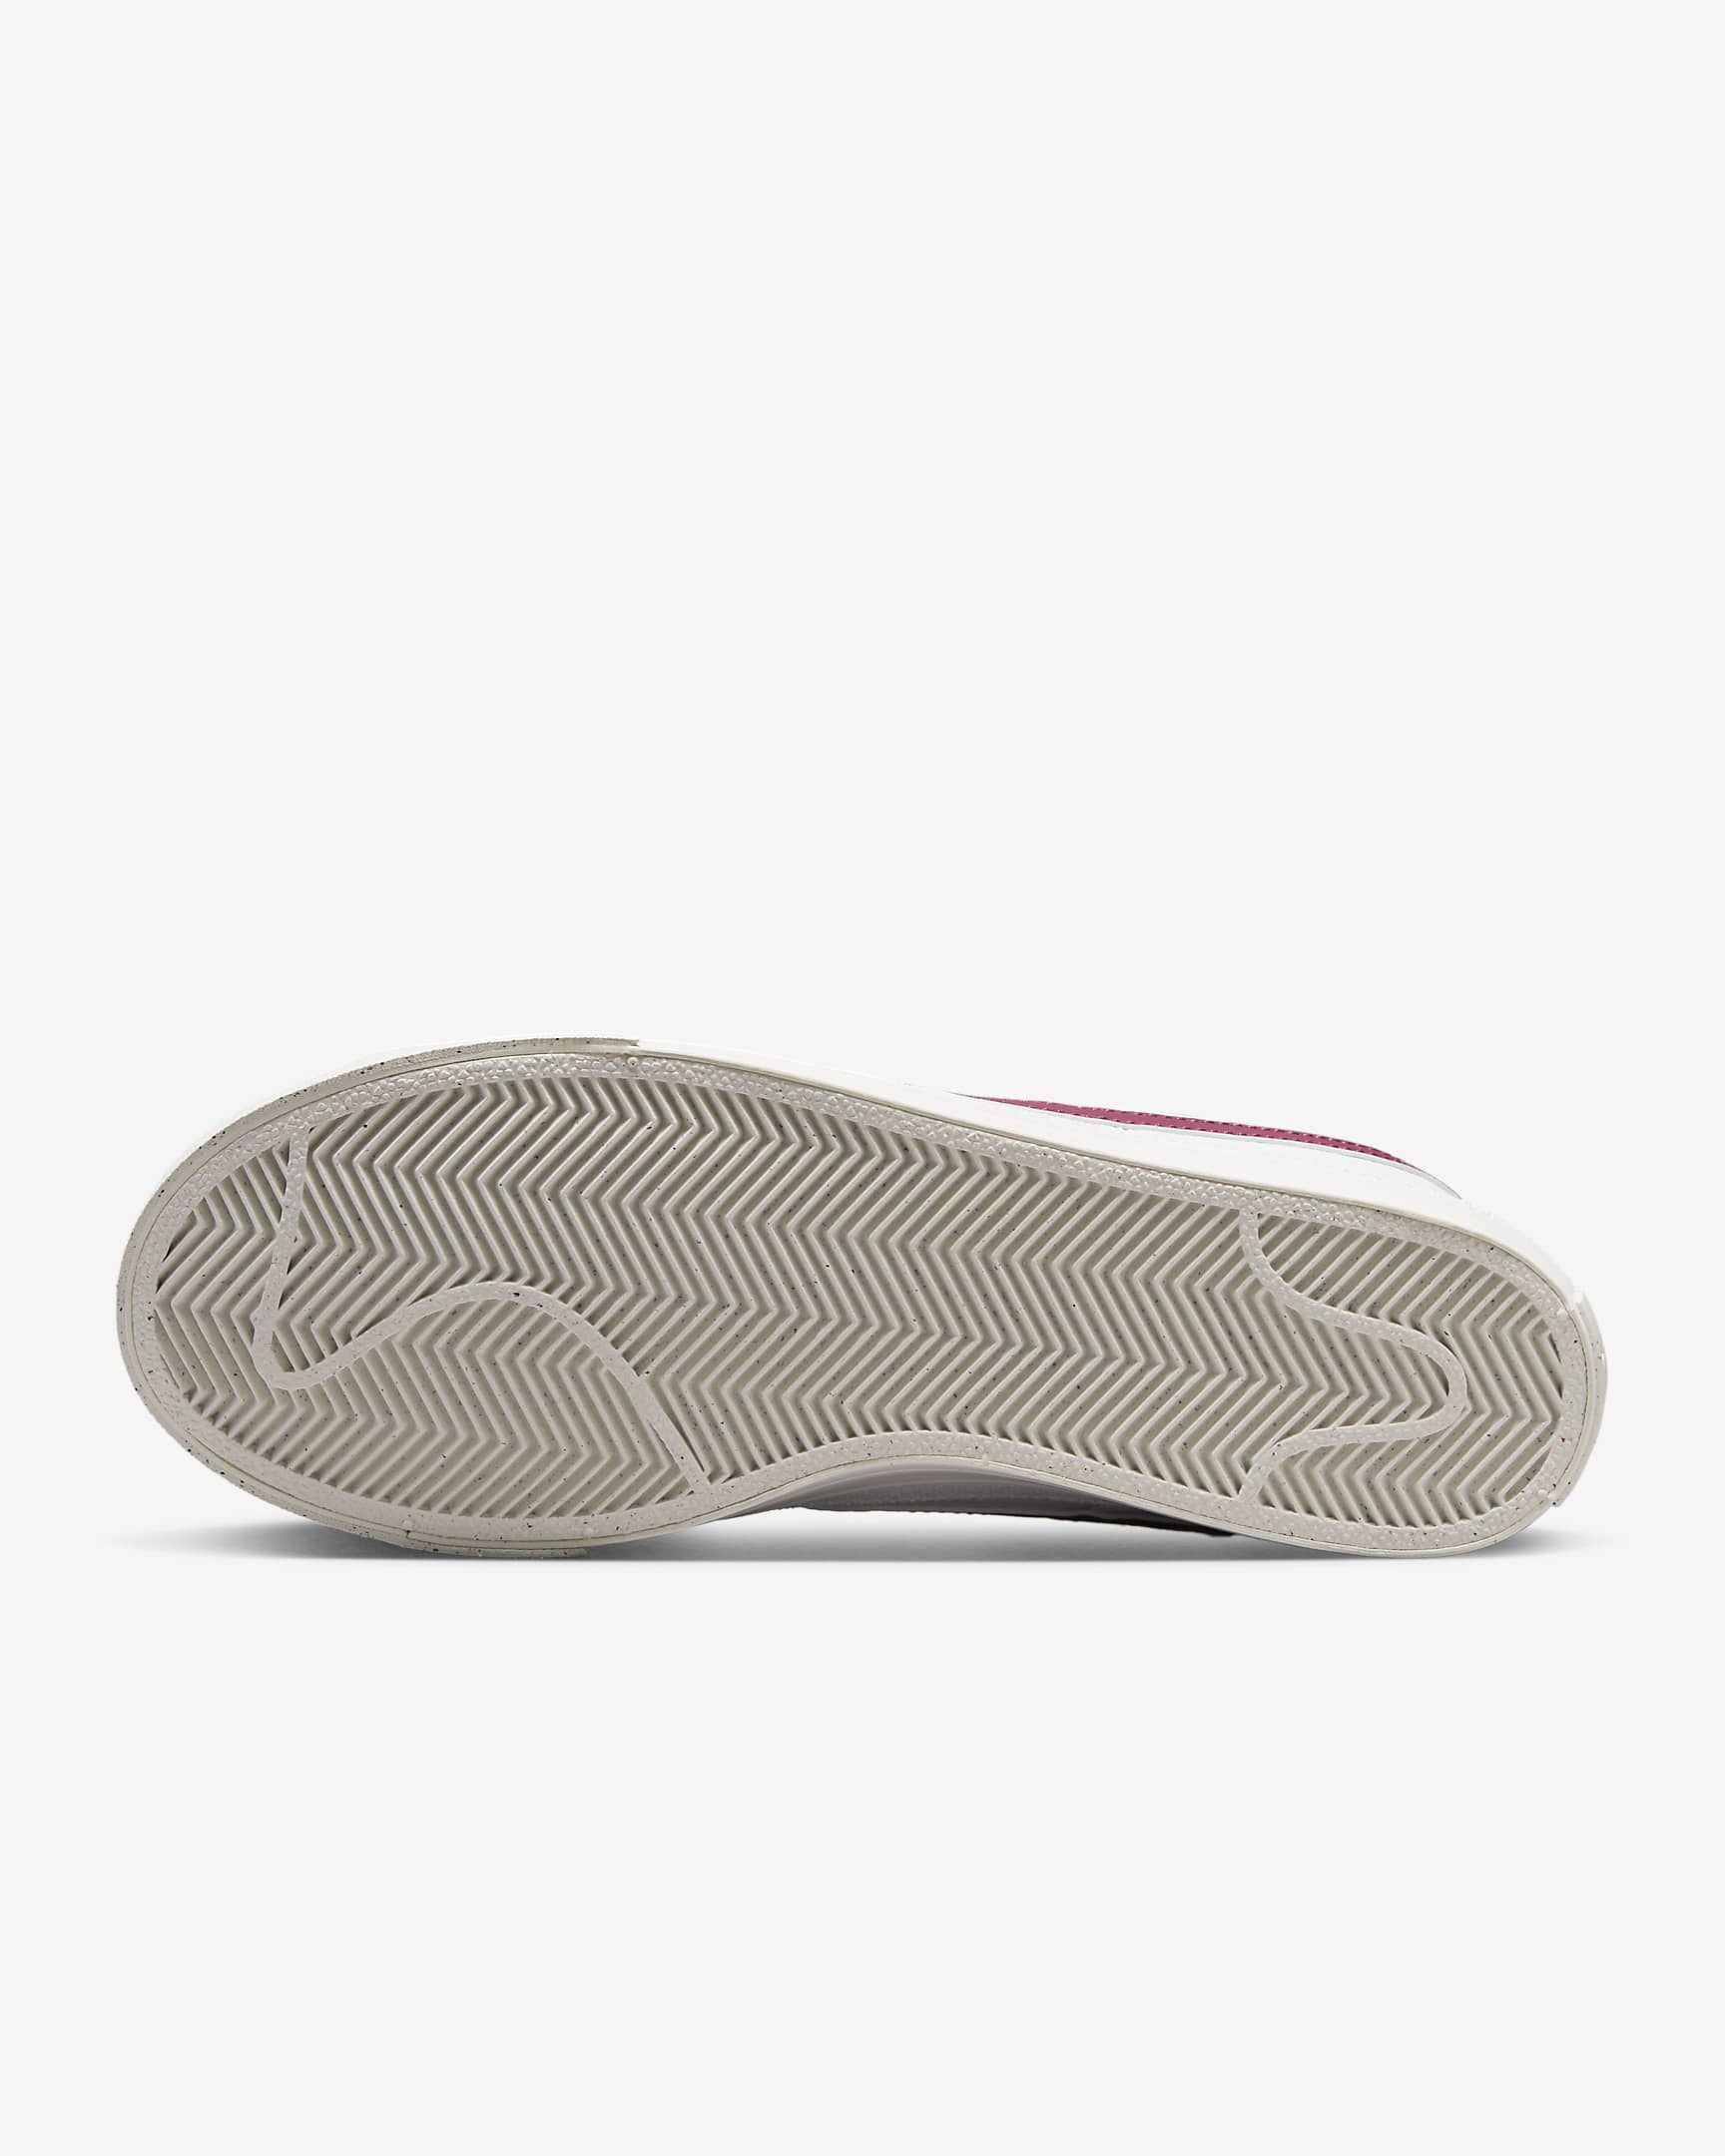 NIKE COURT LEGACY NEXT NATURE - DH3161